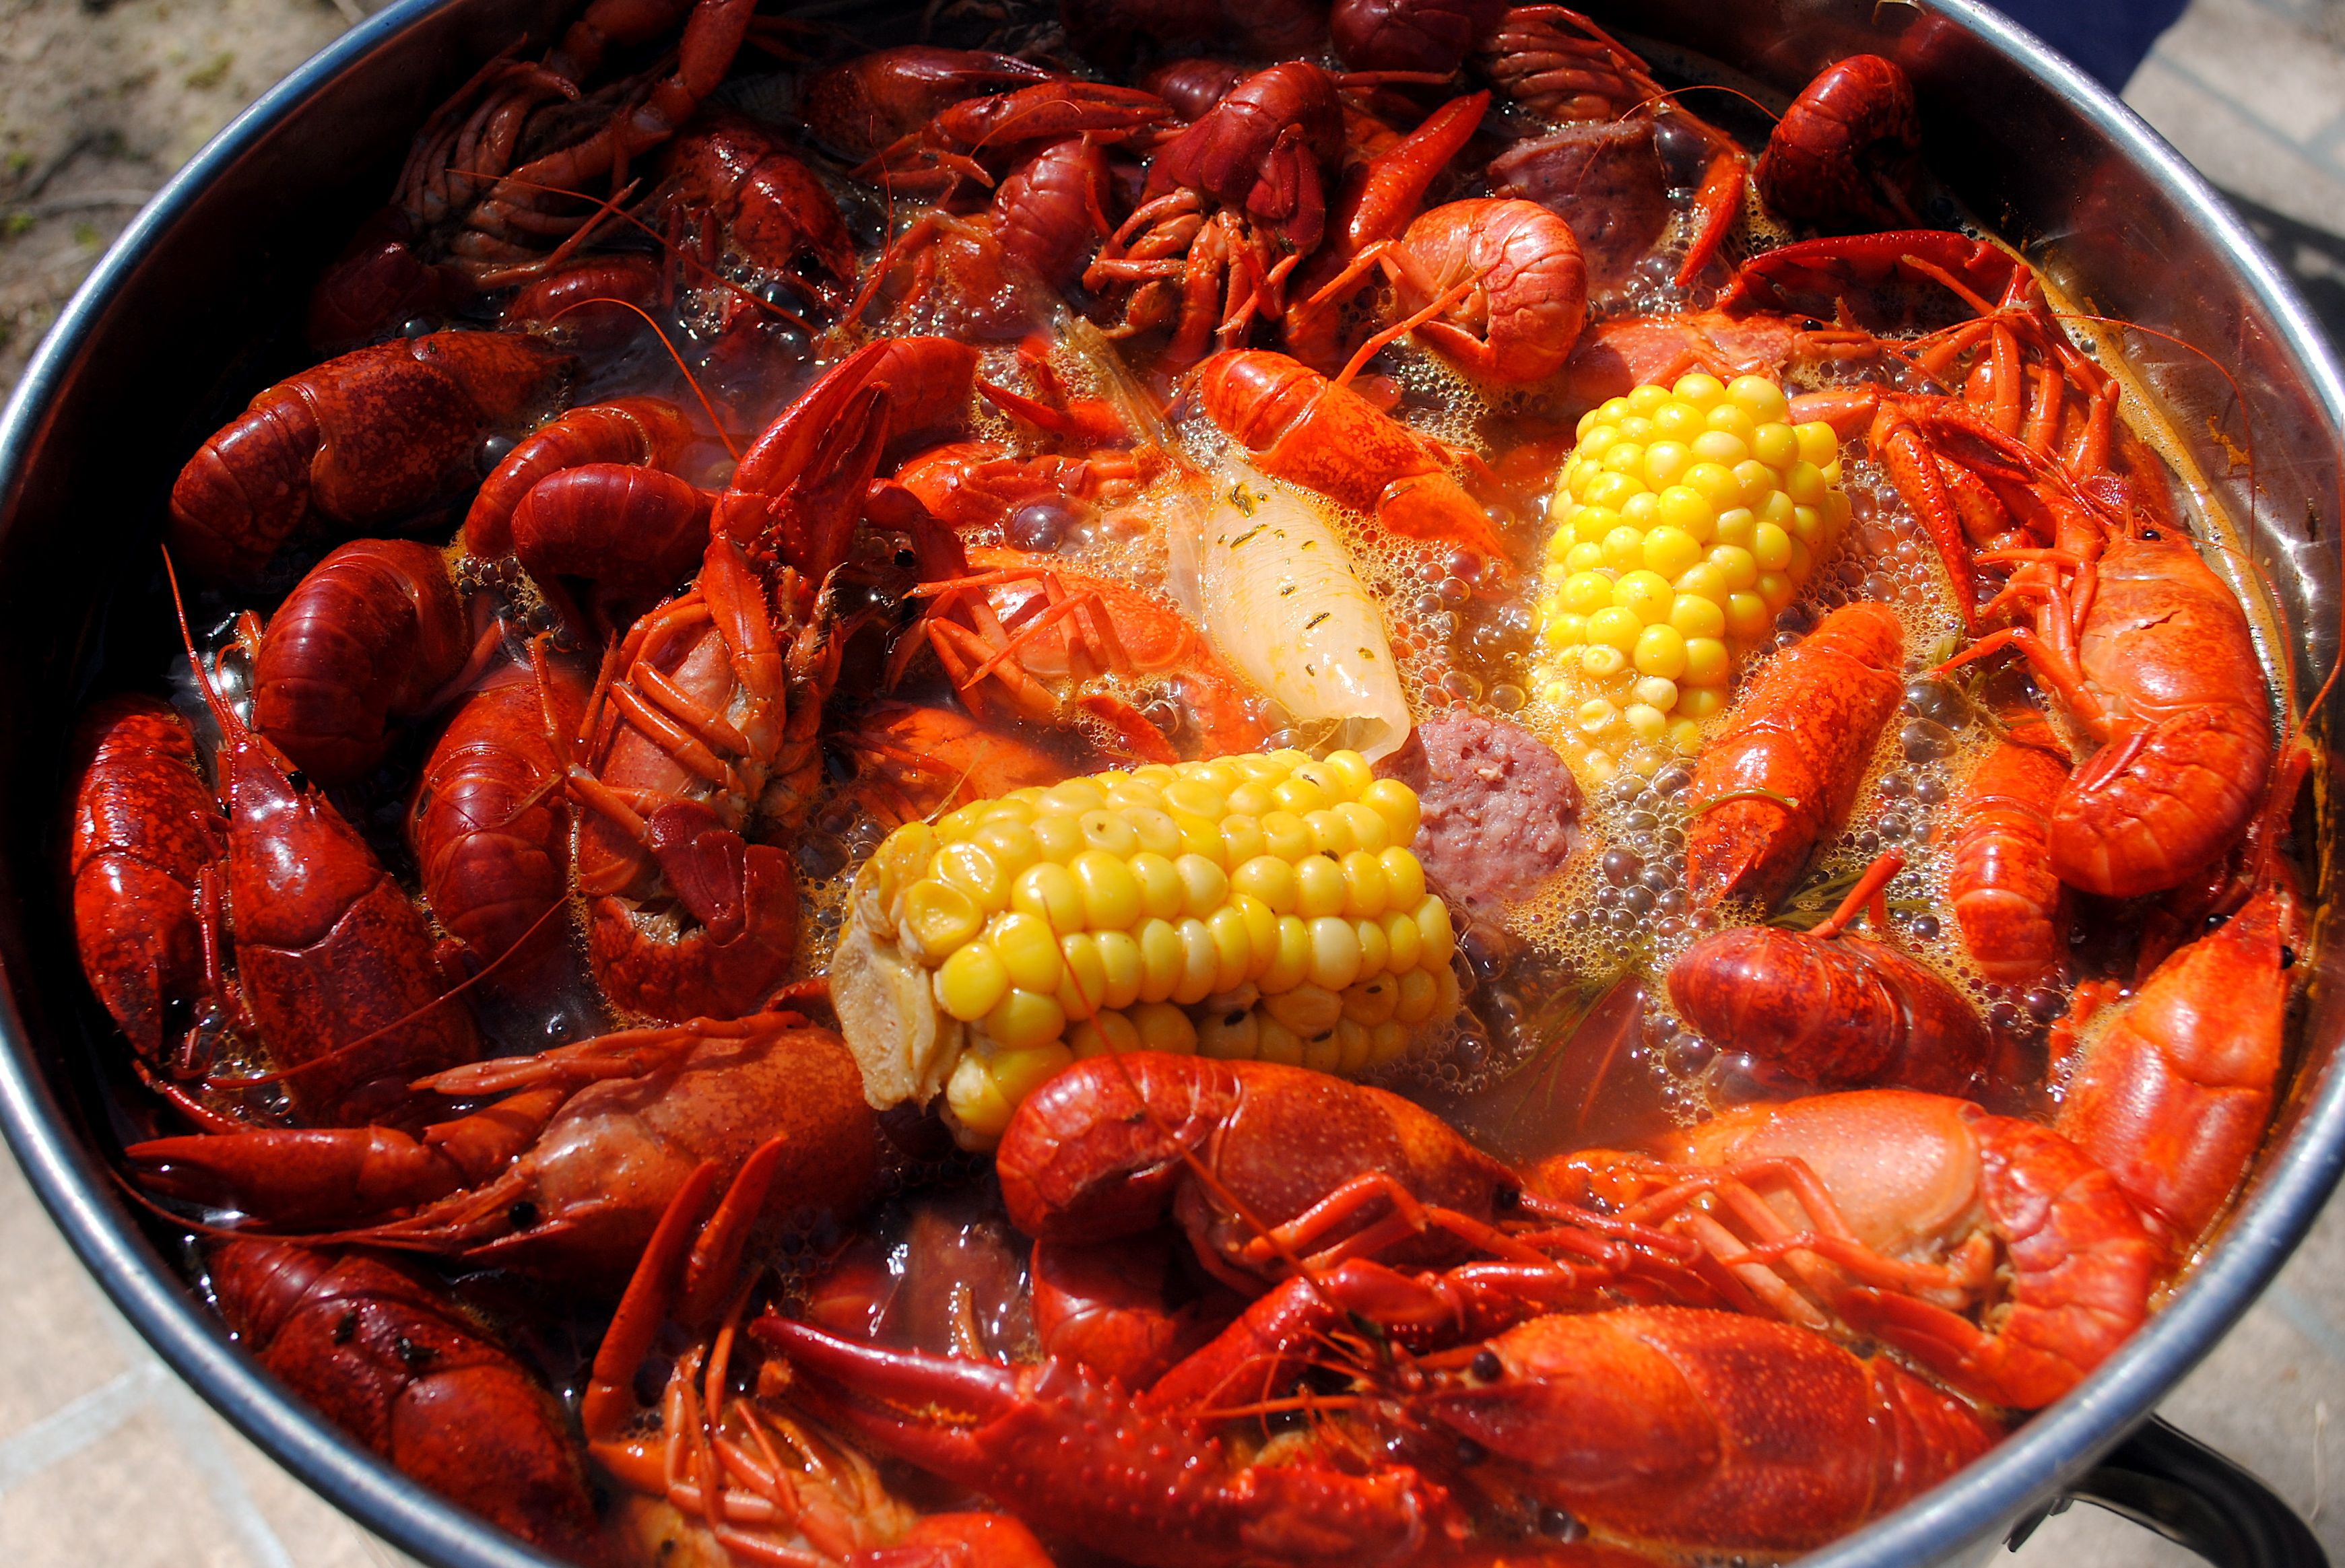 You can download latest photo gallery of Crawfish Boil Wallpaper